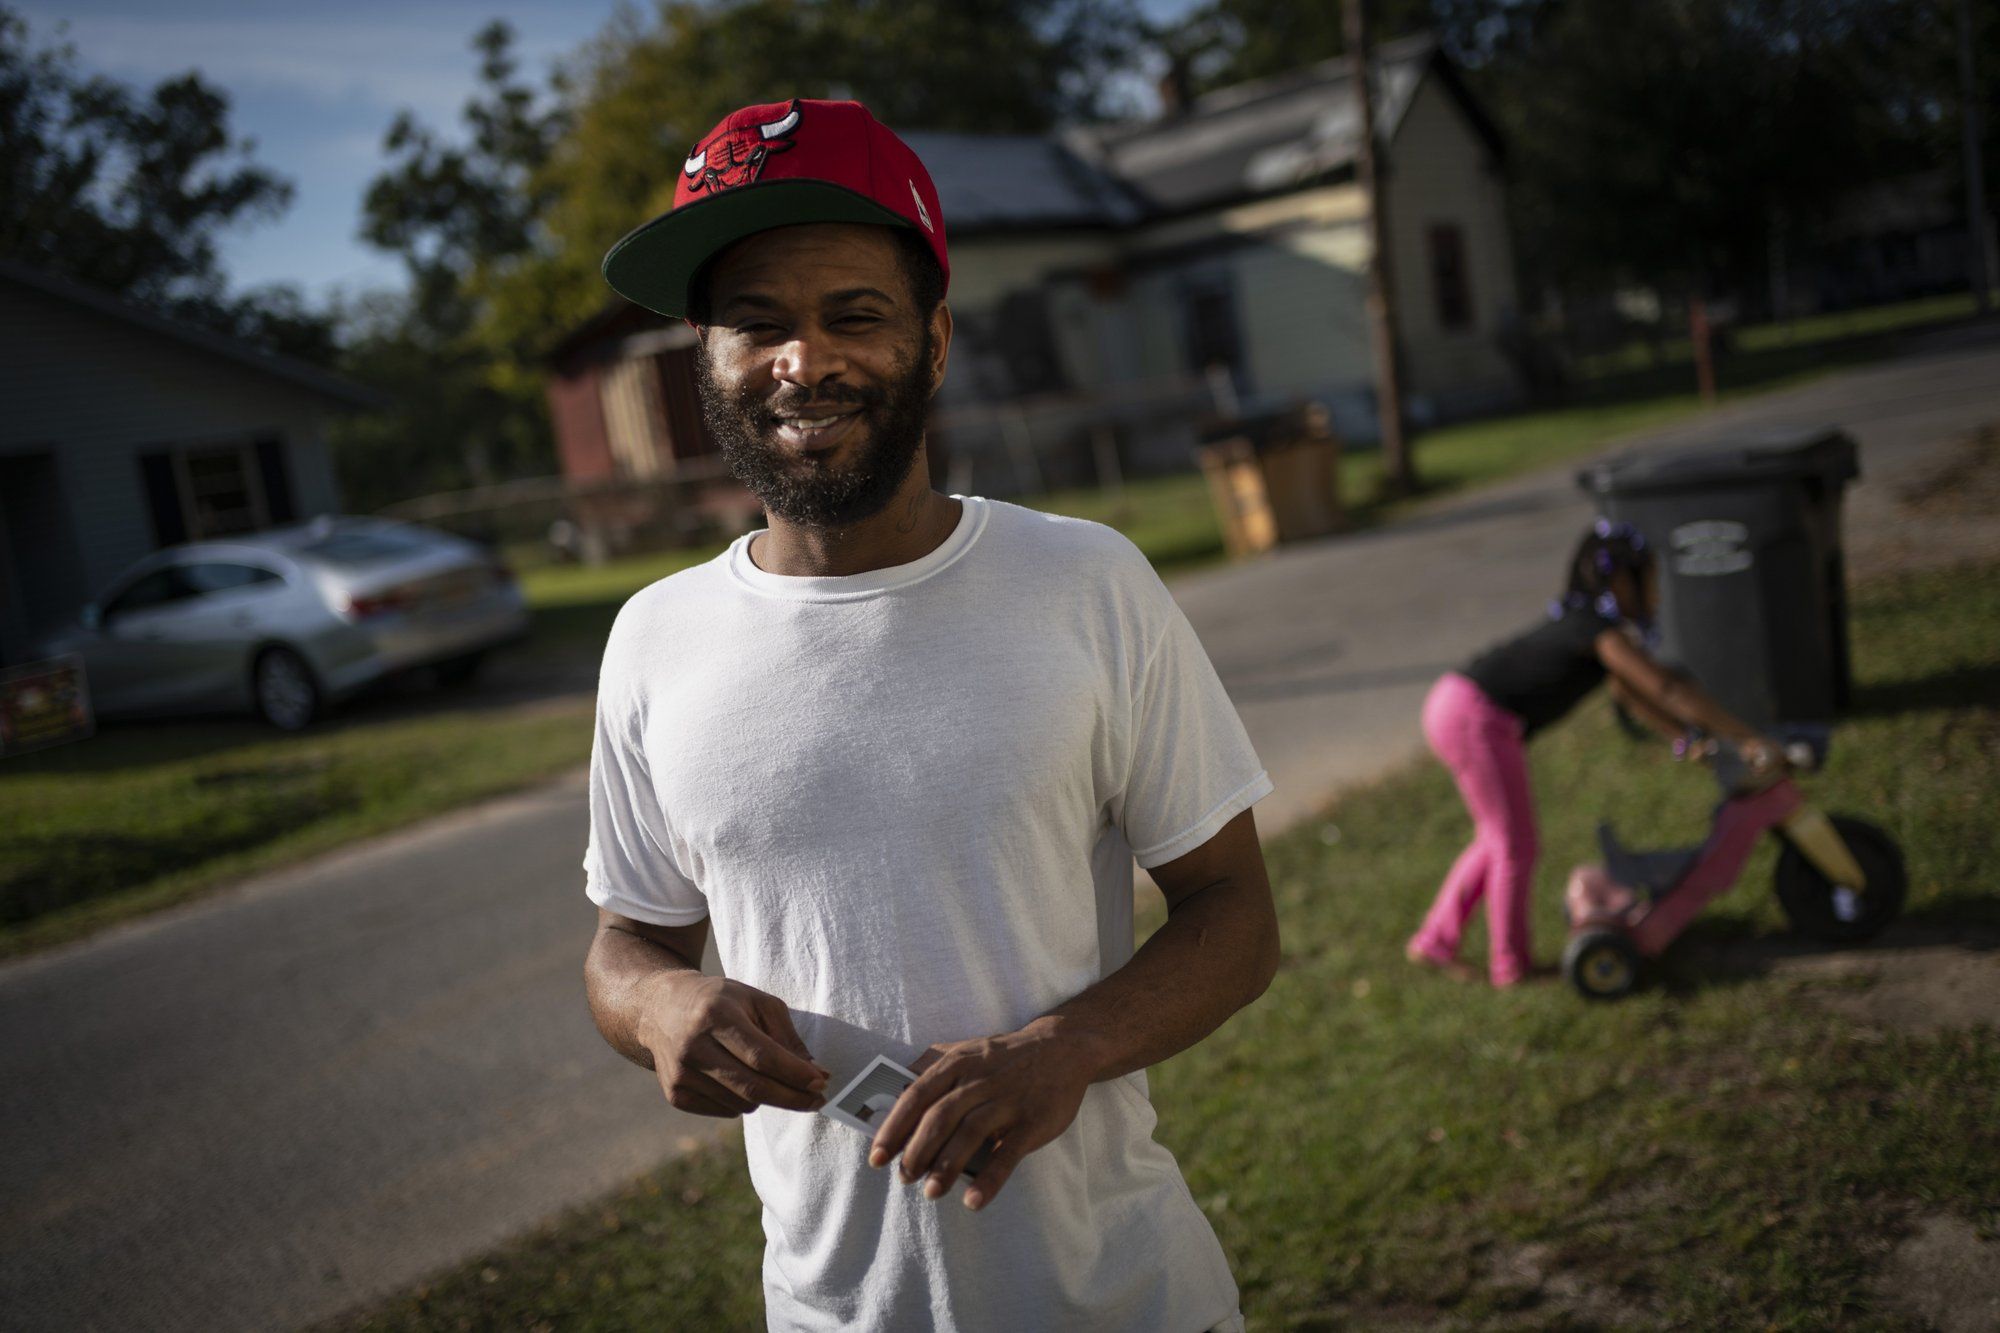 Demarkio Pritchett, 29, stands with his daughter Mariah Pritchett, 8, playing in the background outside his grandmother's home in Meridian, Miss. Image by Wong Maye-E / The Associated Press. United States, 2020.
